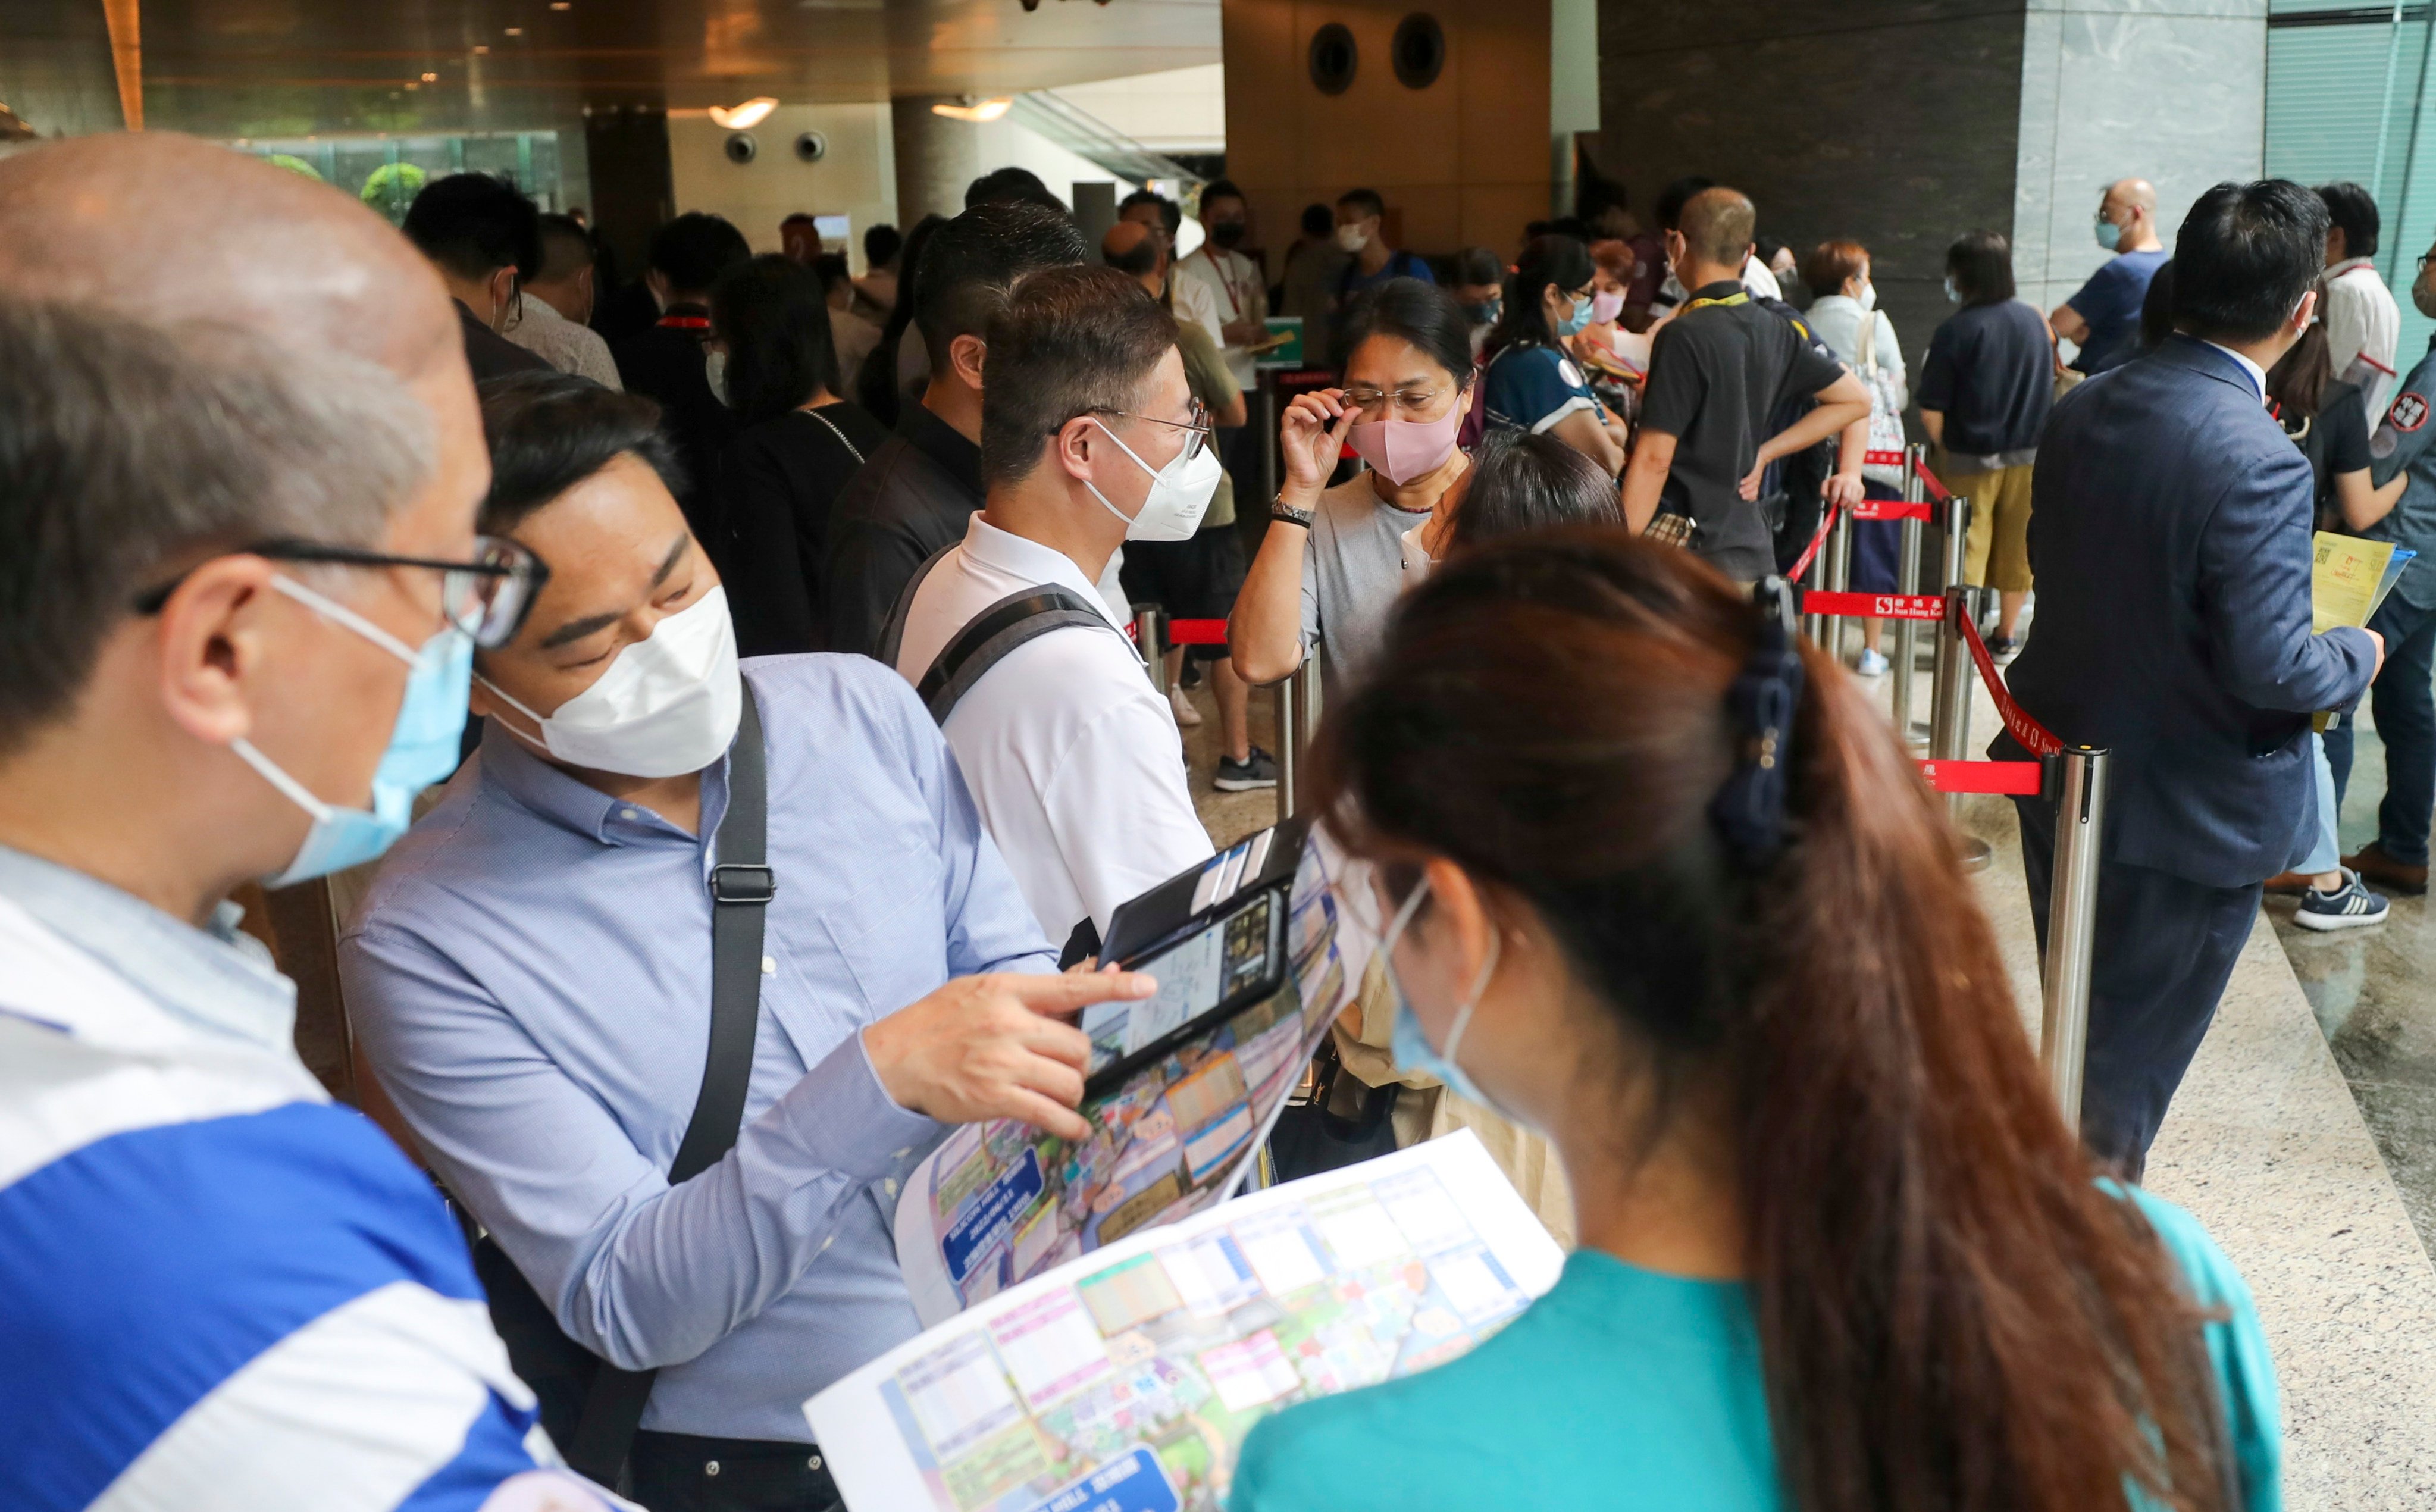 Buyers of Sun Hung Kai Properties (SHKP)‘s Silicon Hill flats in Tai Po line up at the developer’s sales office in at the ICC on 11 June 2022. Photo: Xiaomei Chen